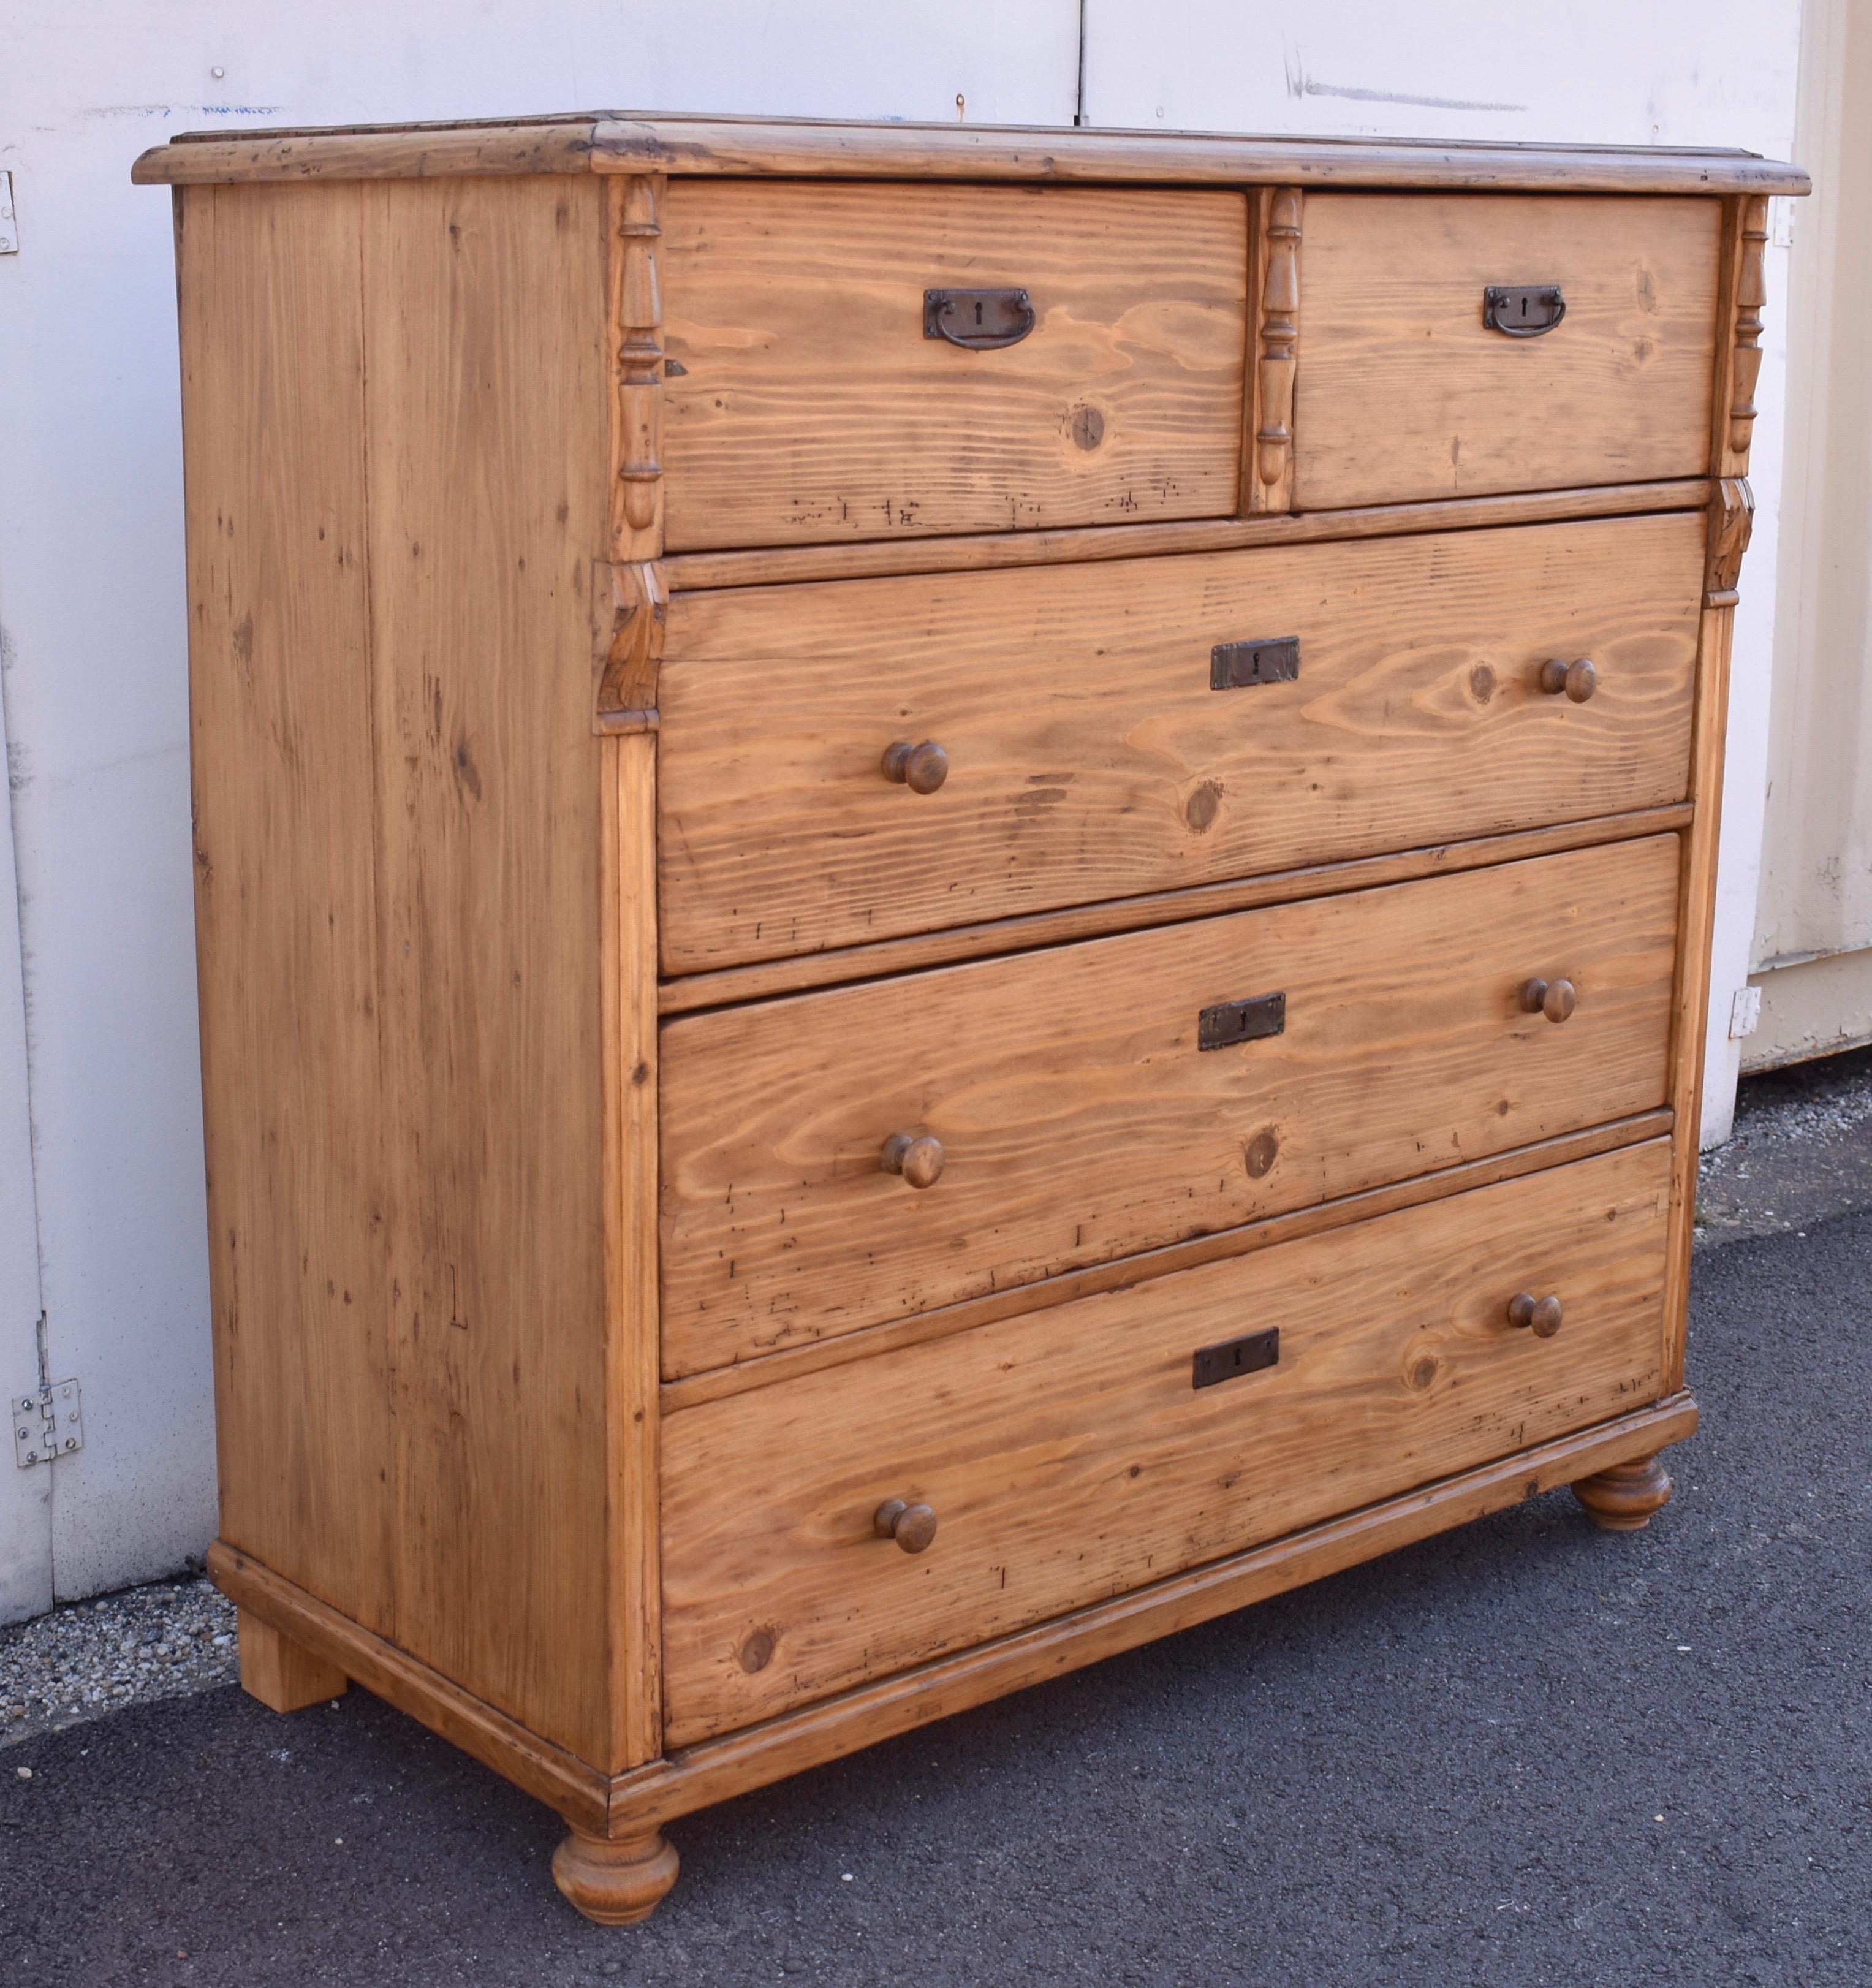 This large chest of five drawers has a lovely warm color and a strong grain pattern to the drawer fronts.  Applied crown molding around the top gives it a step-down effect and exposes the dovetails that join the top to the sides.  The deep top